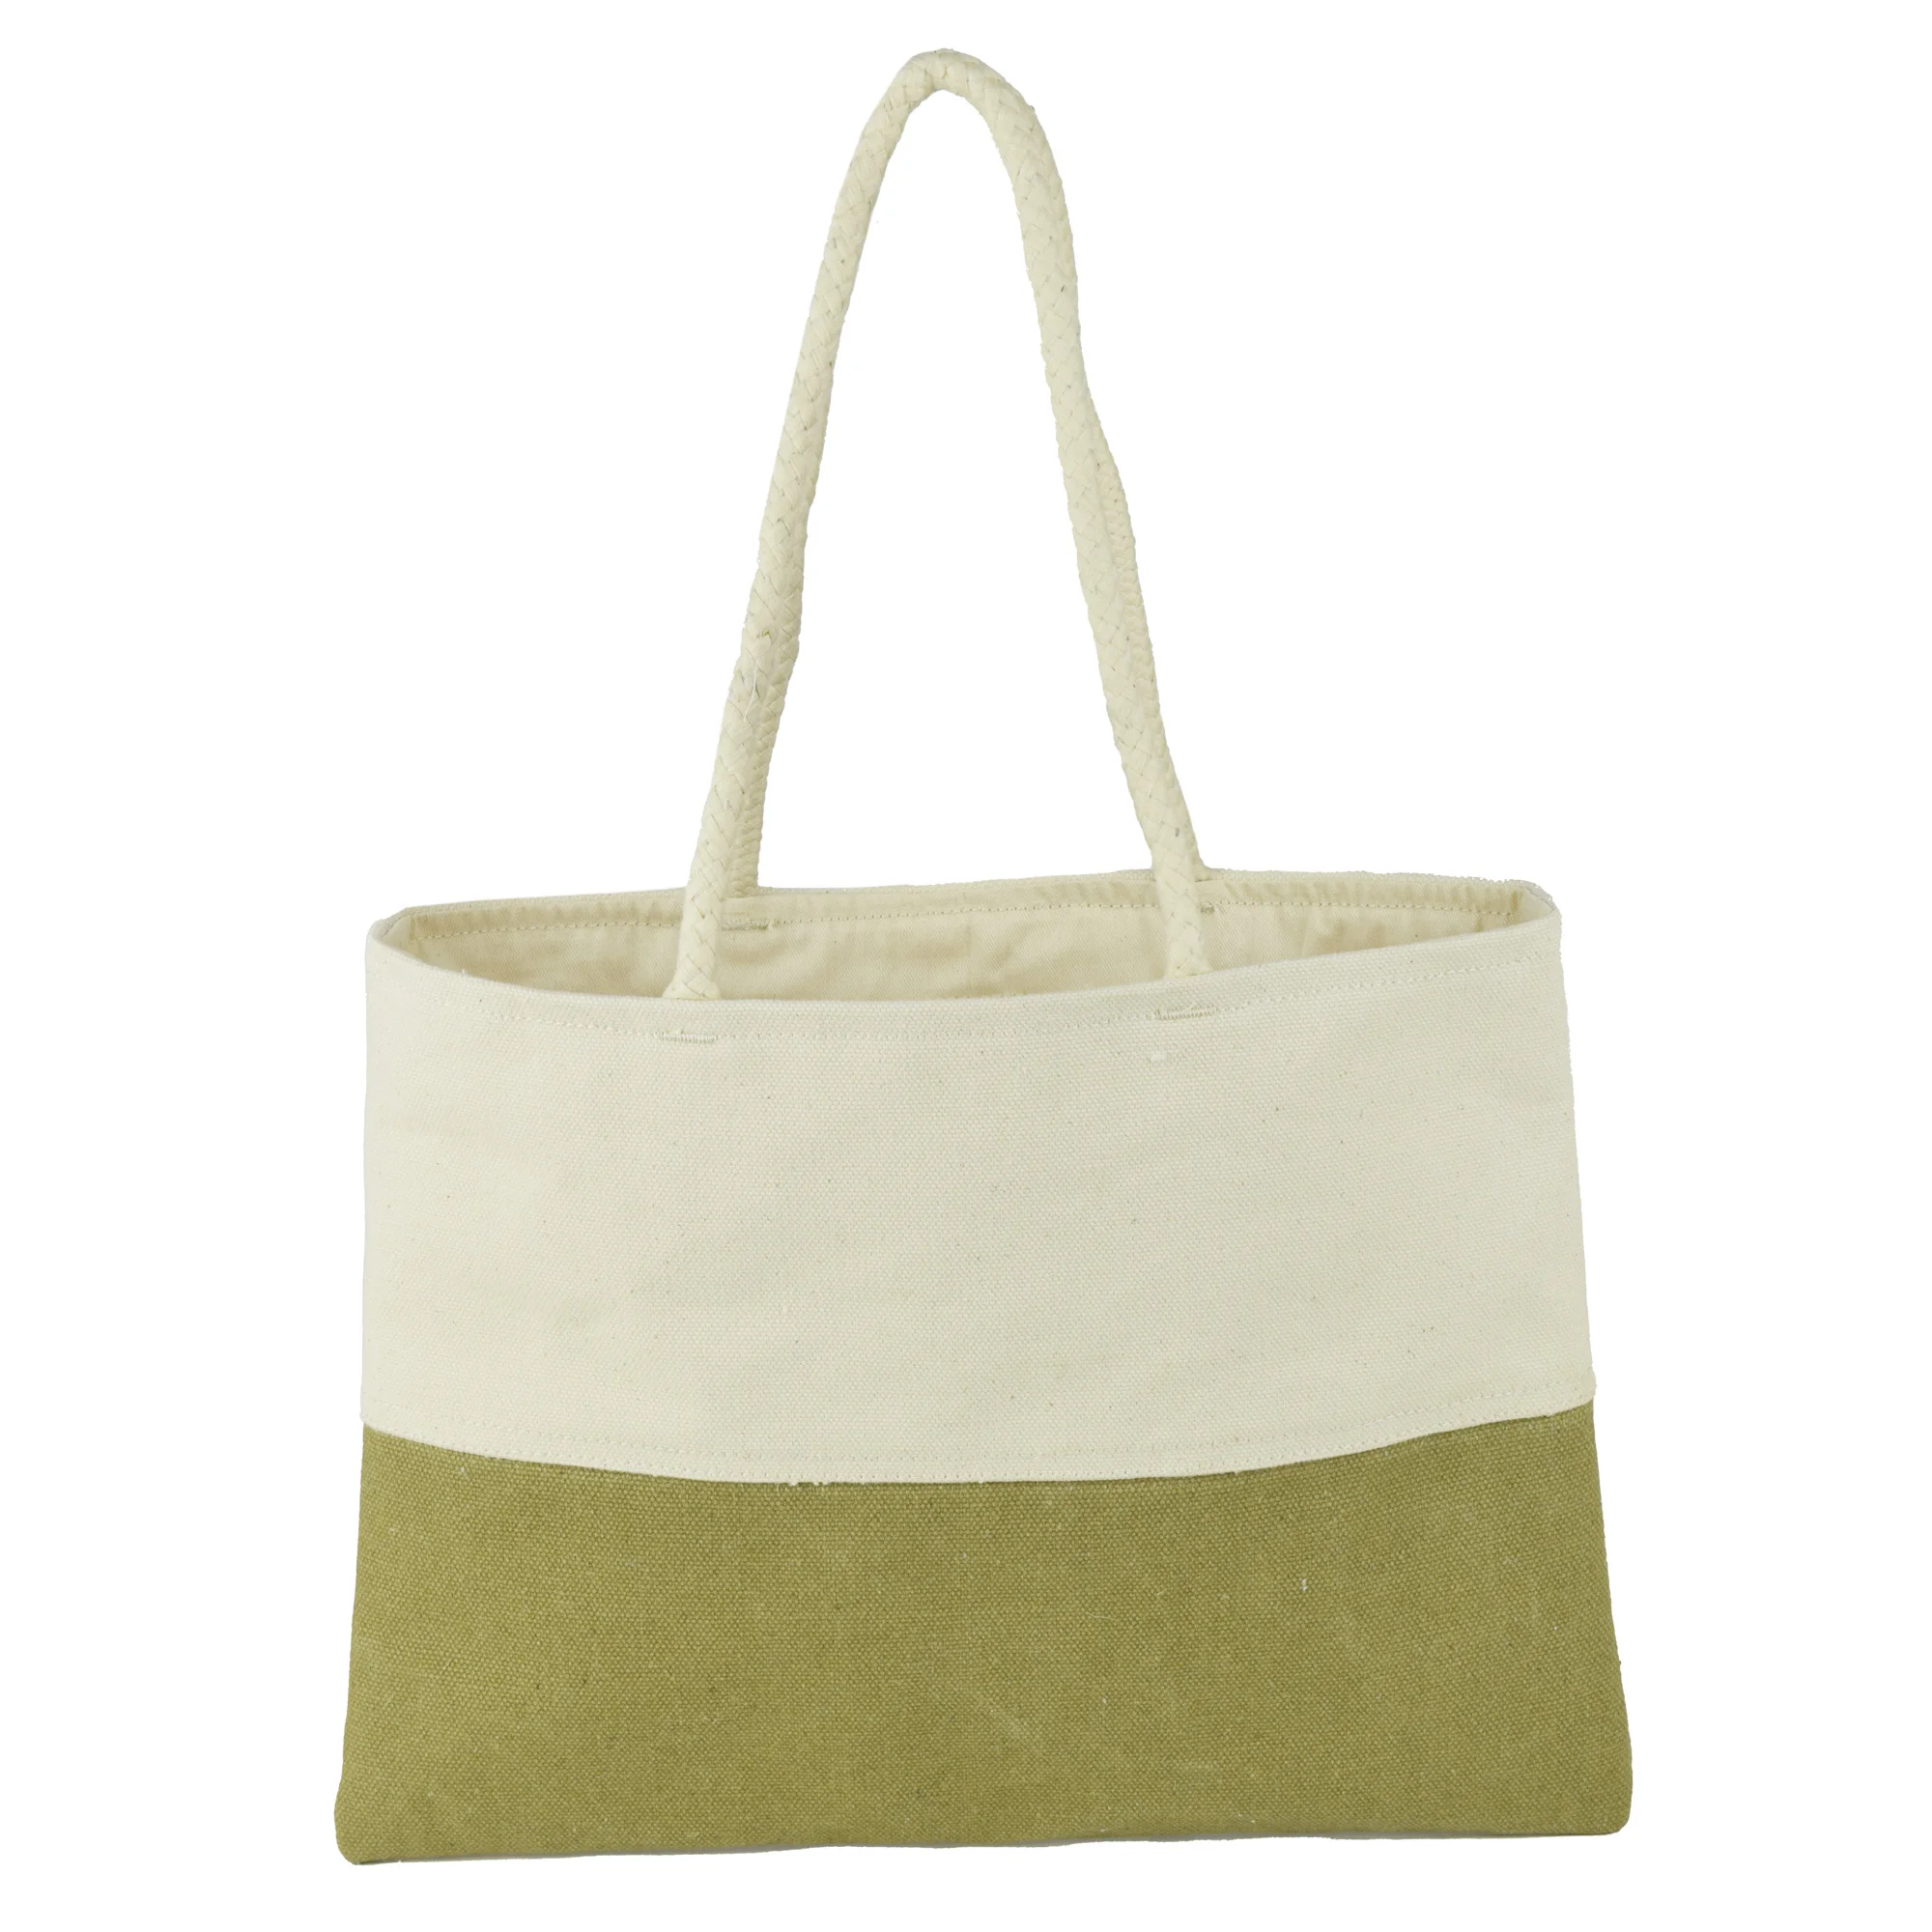 Tote Bags Wholesaler in LA,Wlesale canvas tote bags,Cheap Canvas totes